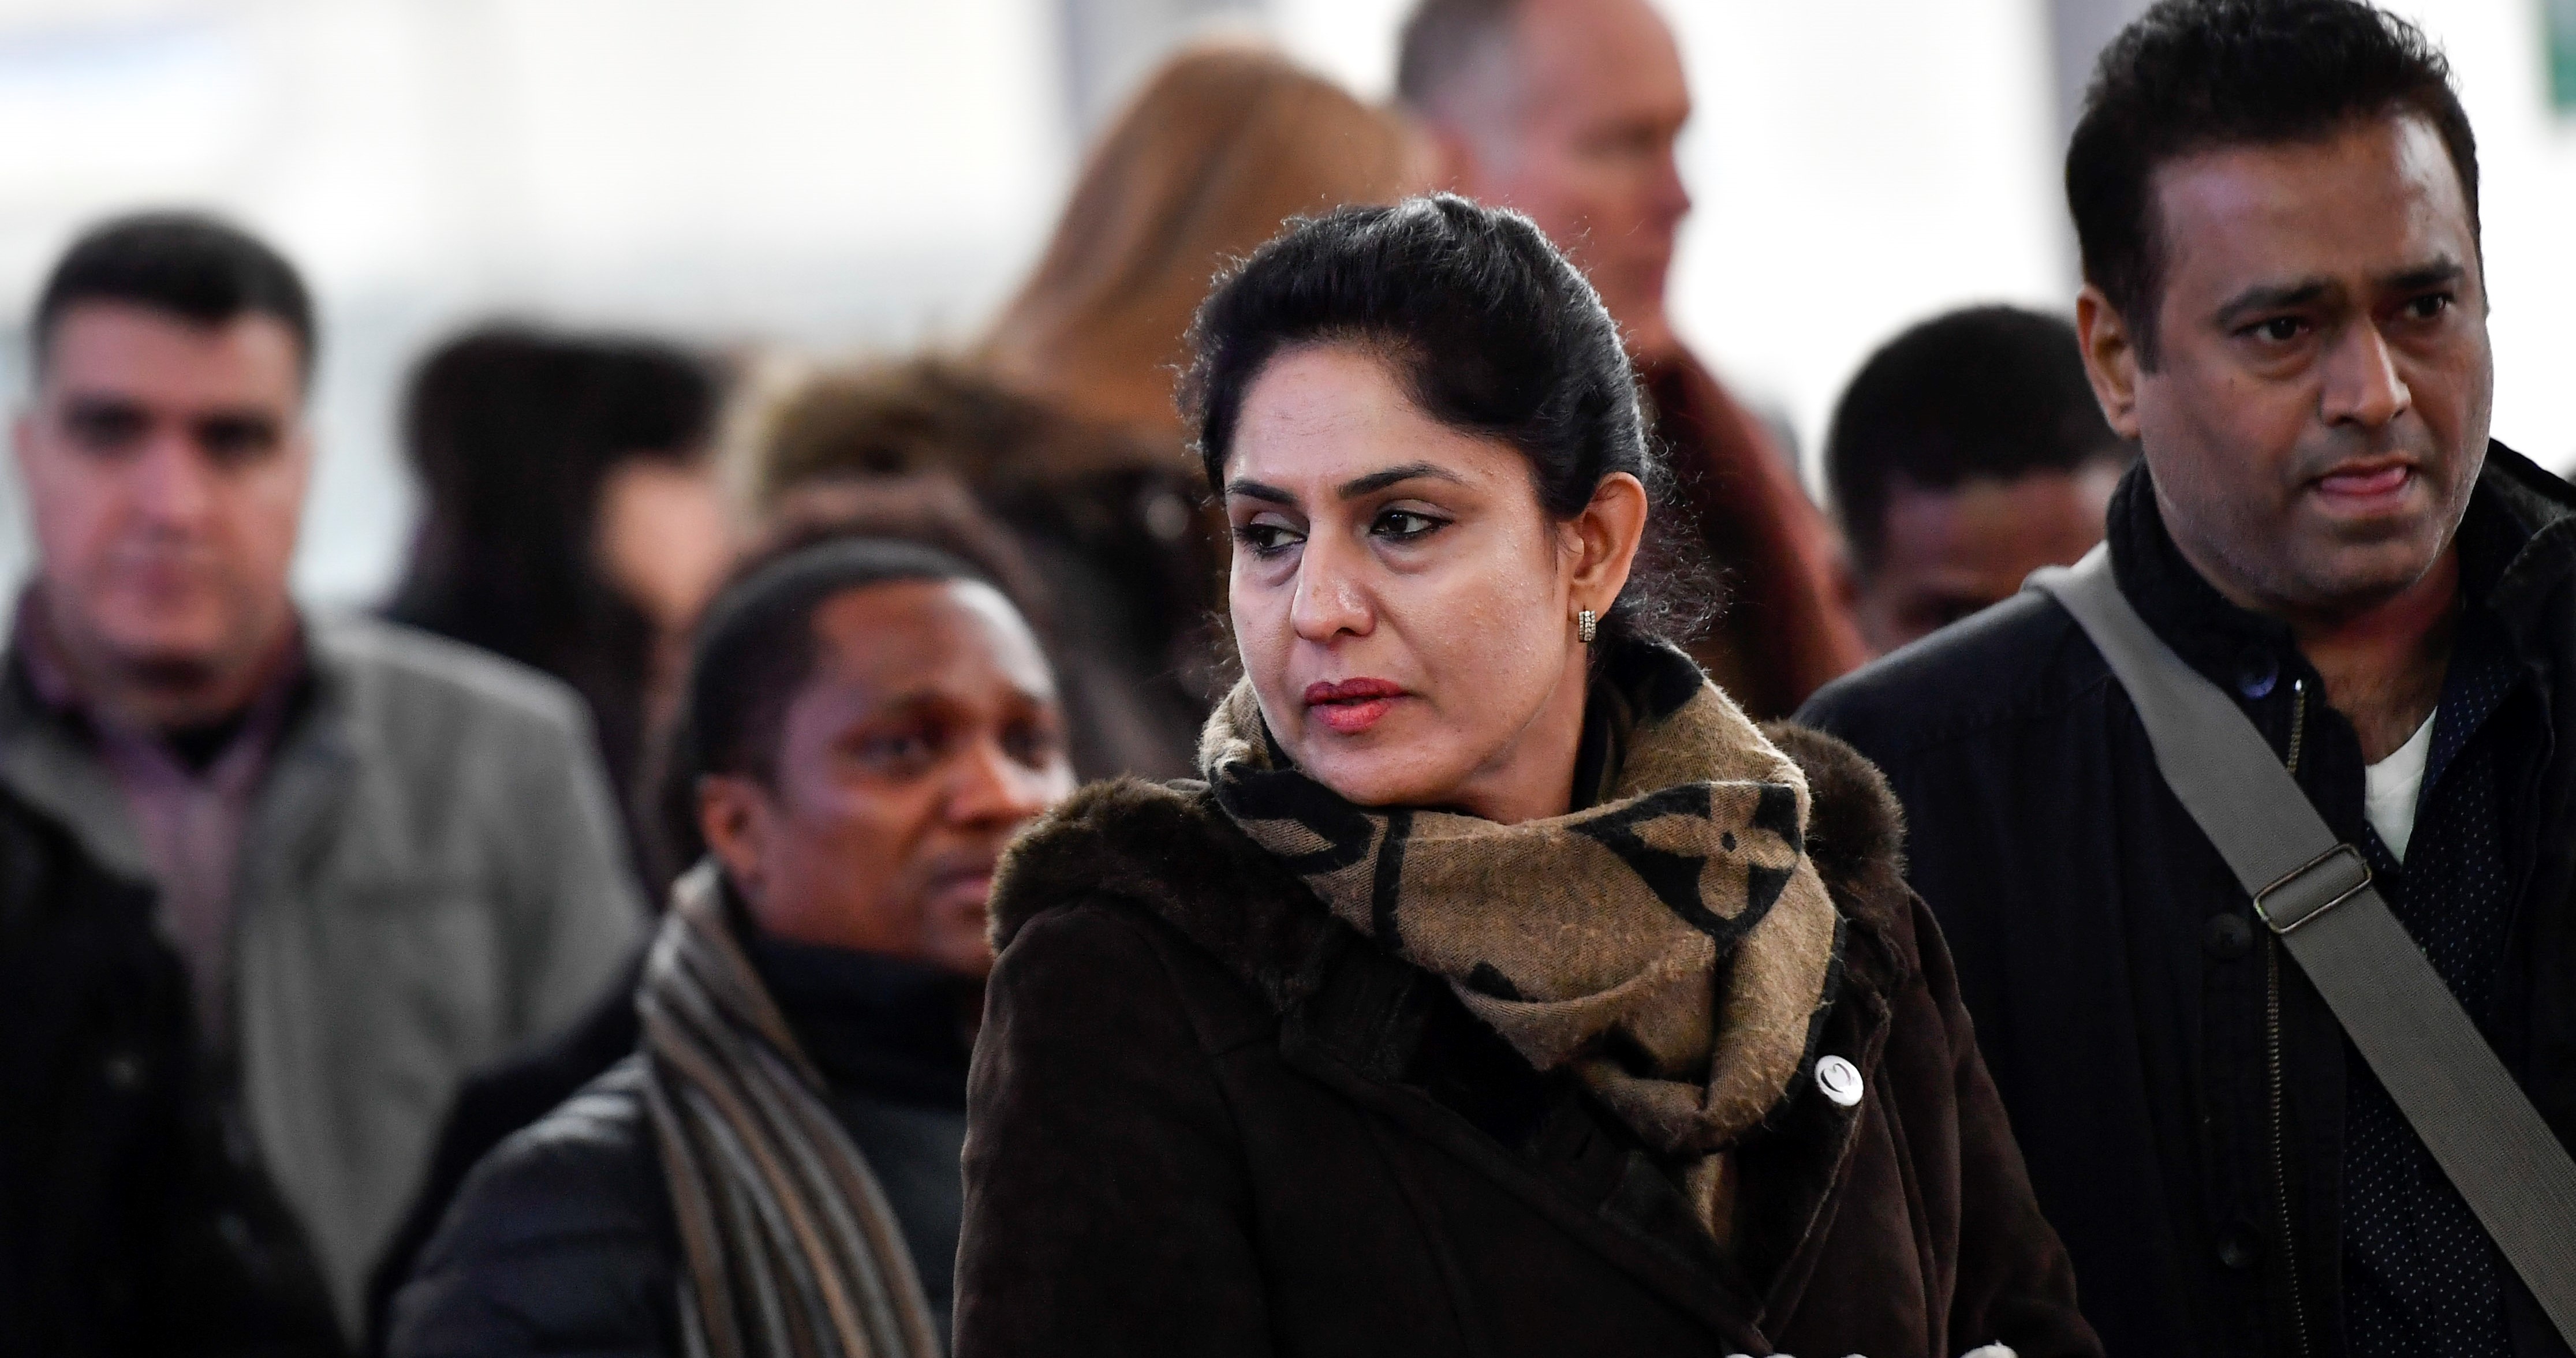 Nidhi Chaphekar and her husband at the 2018 memorial service at Brussels Airport